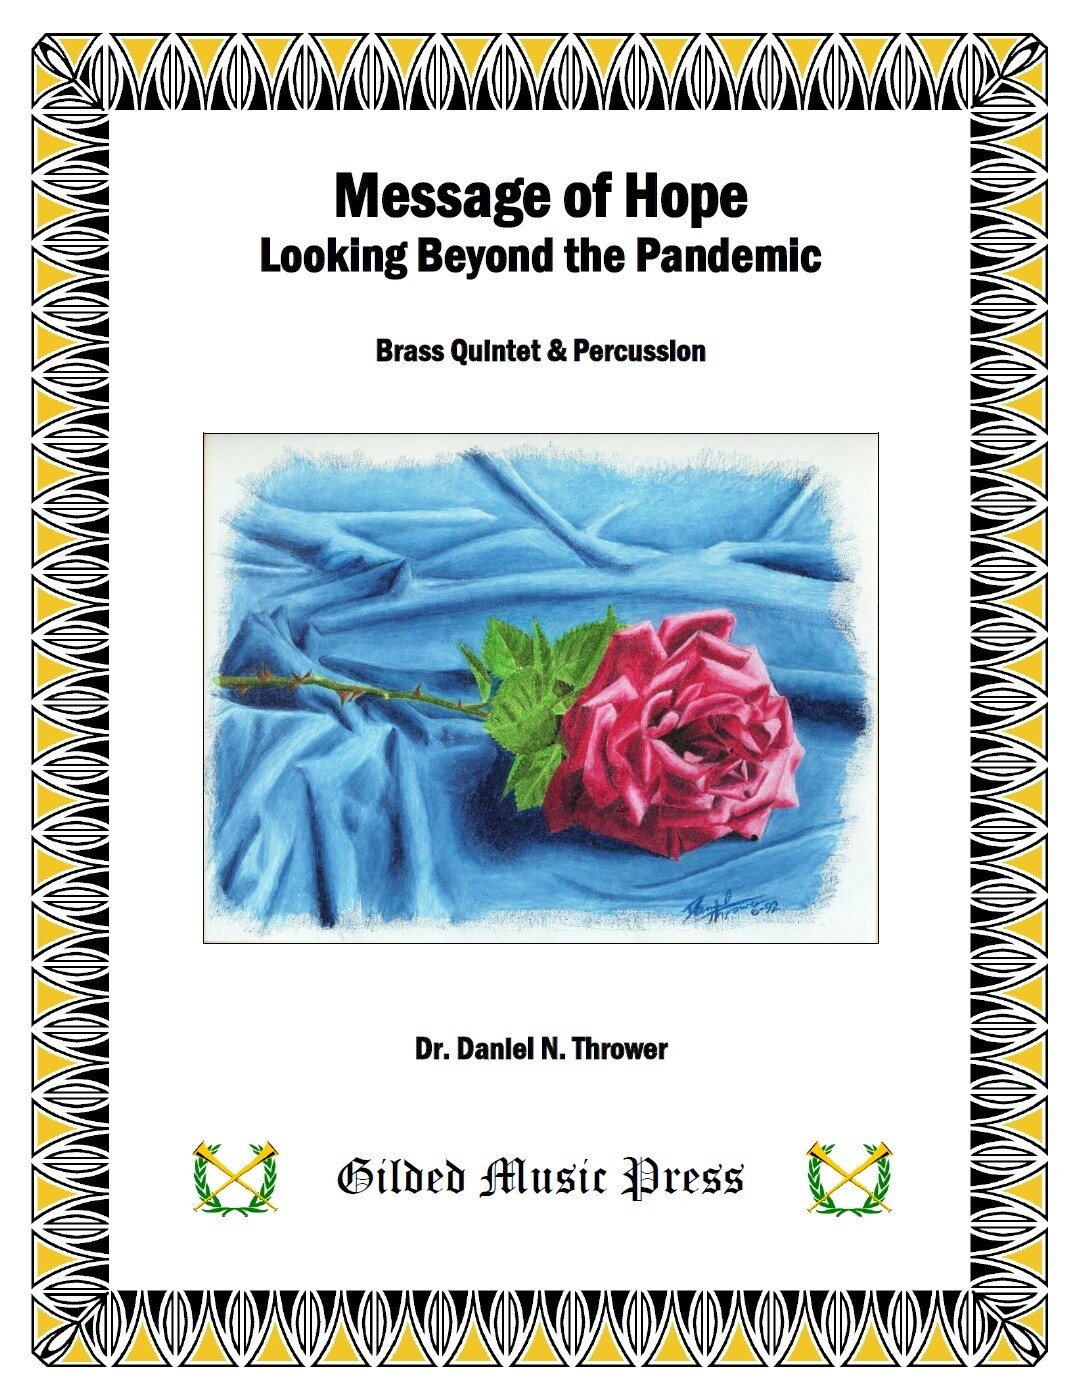 GMP 3022: Message of Hope (Brass Quintet & Percussion), Dr. Daniel Thrower